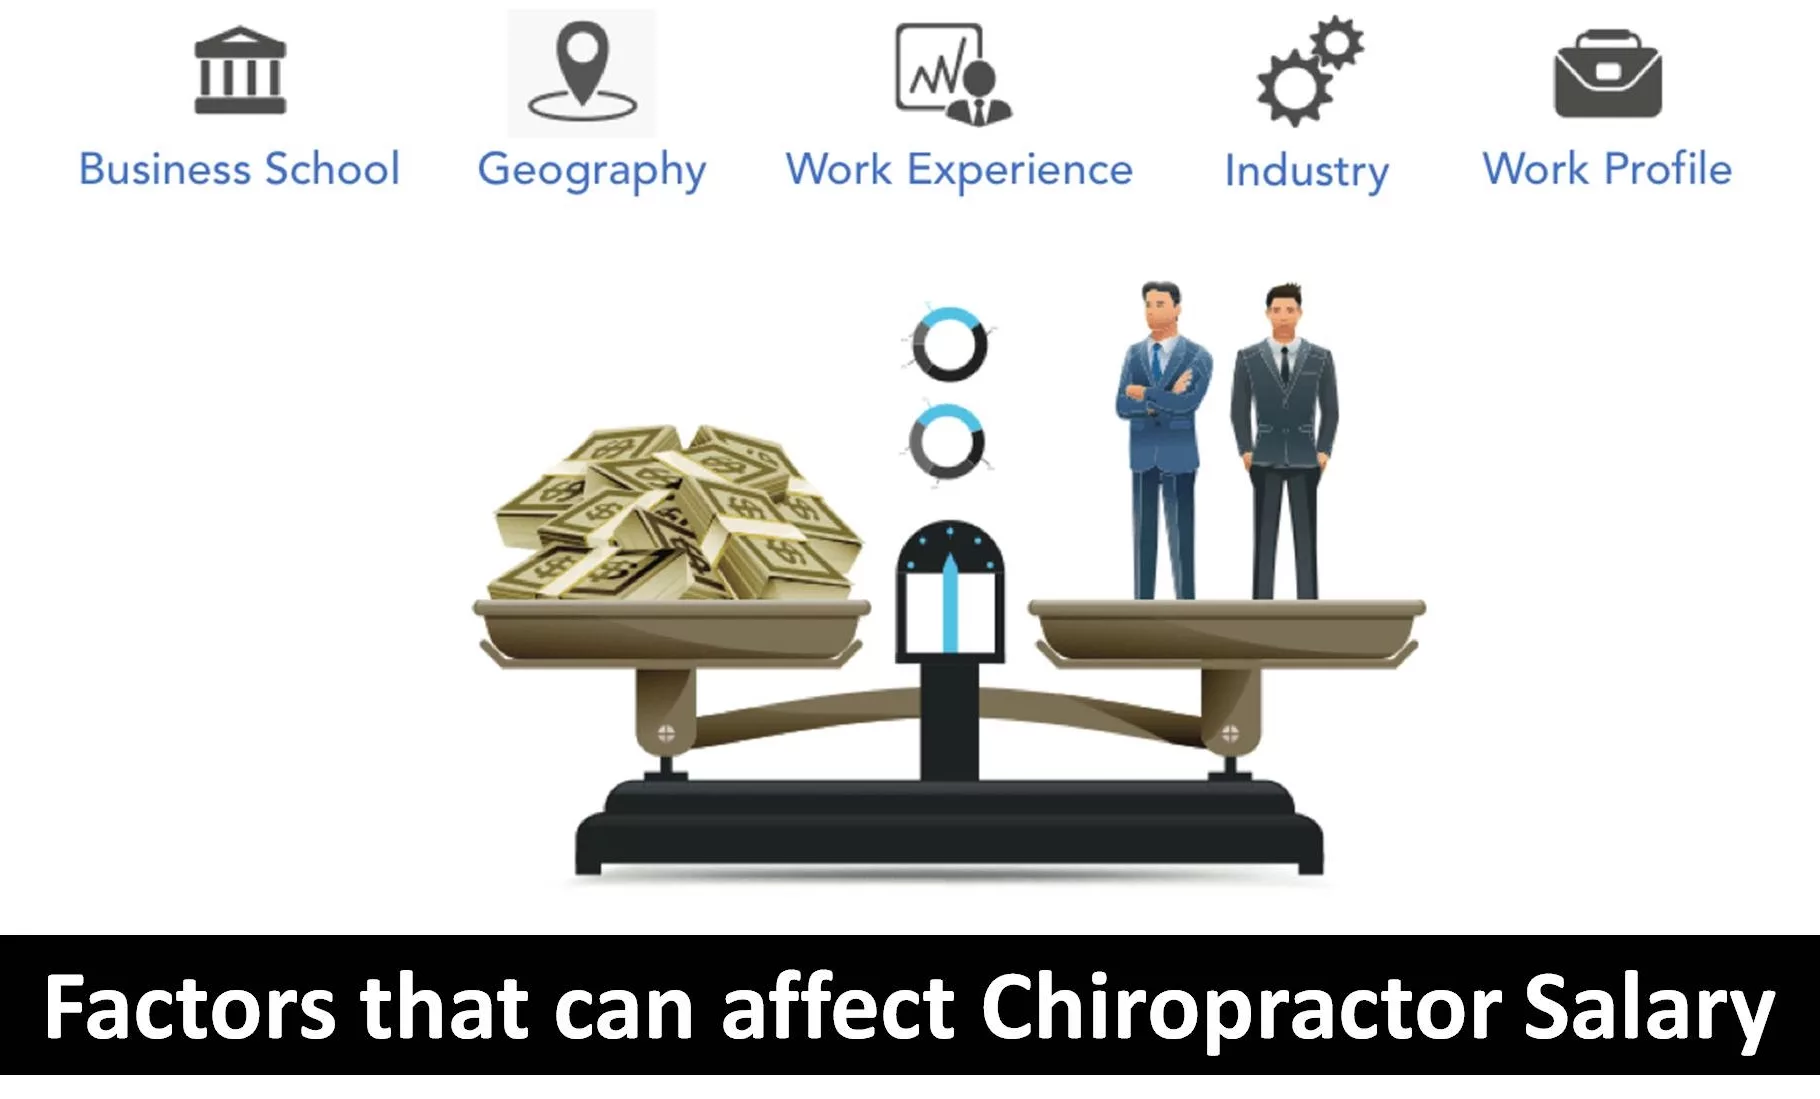 Factors that can affect Chiropractor Salary